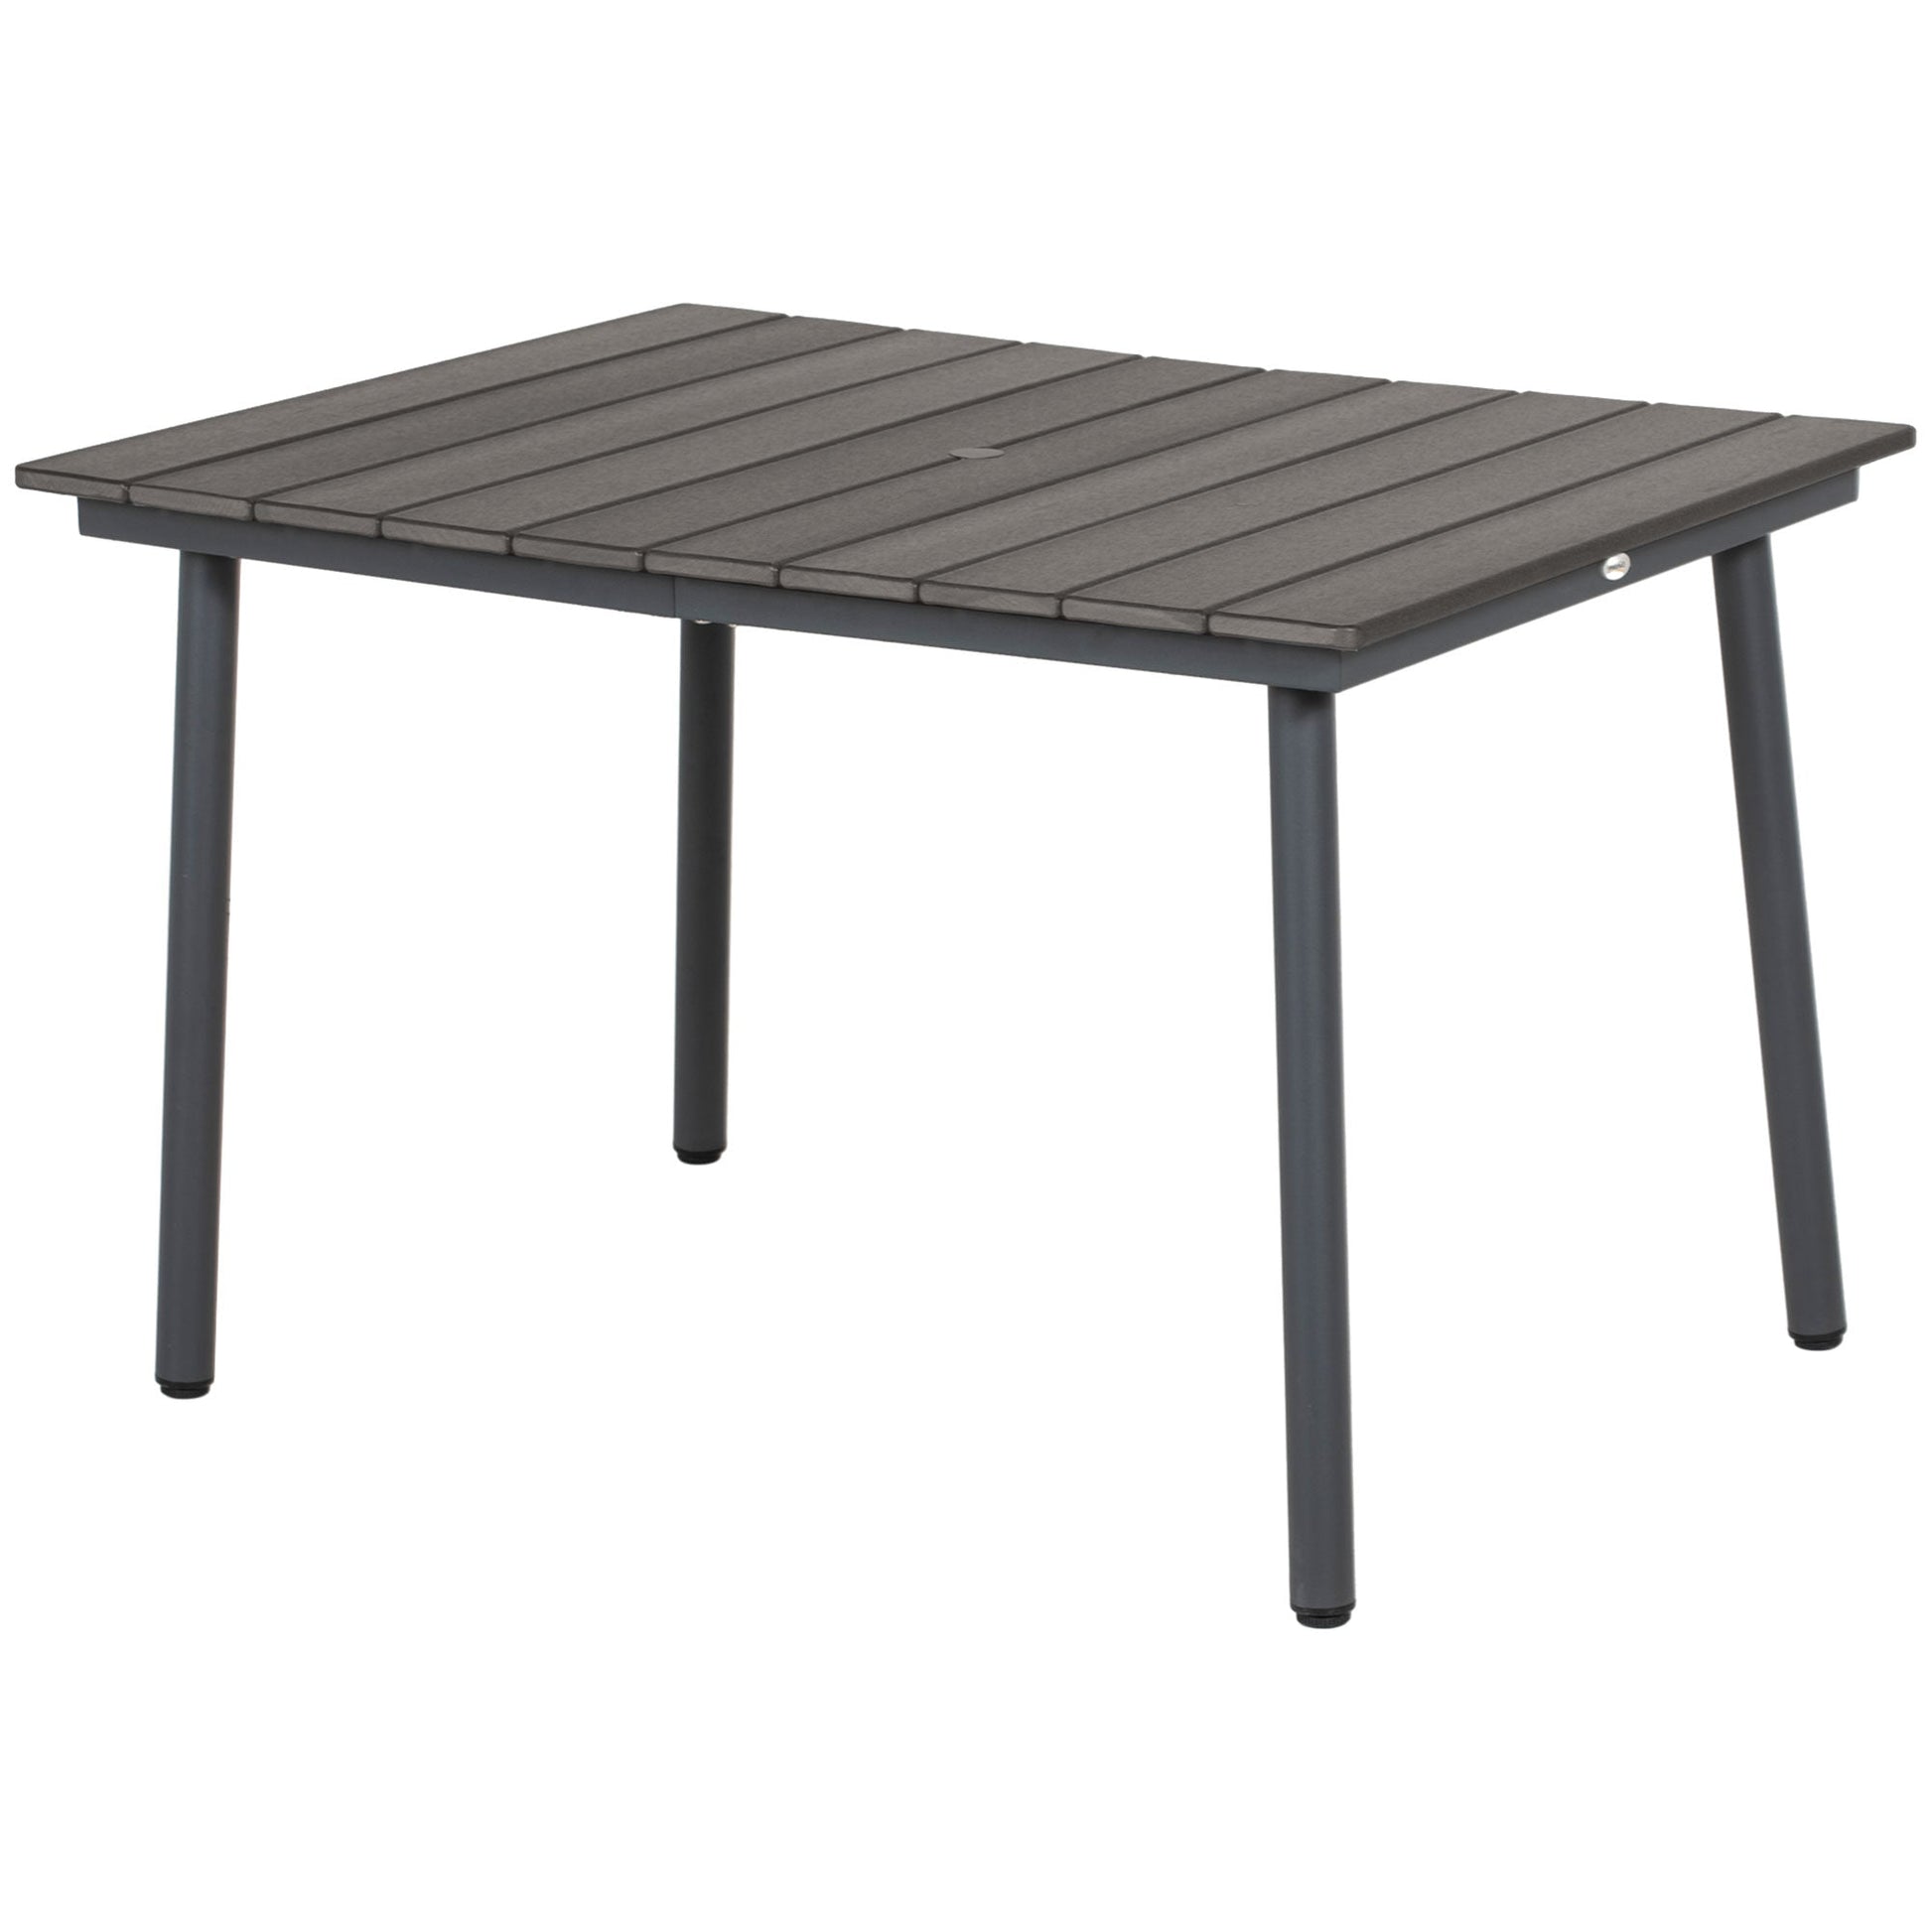 47" Outdoor Dining Table with Umbrella Hole, Aluminium Frame, HDPE Table Top, Slatted Design for Backyard, Dark Grey at Gallery Canada